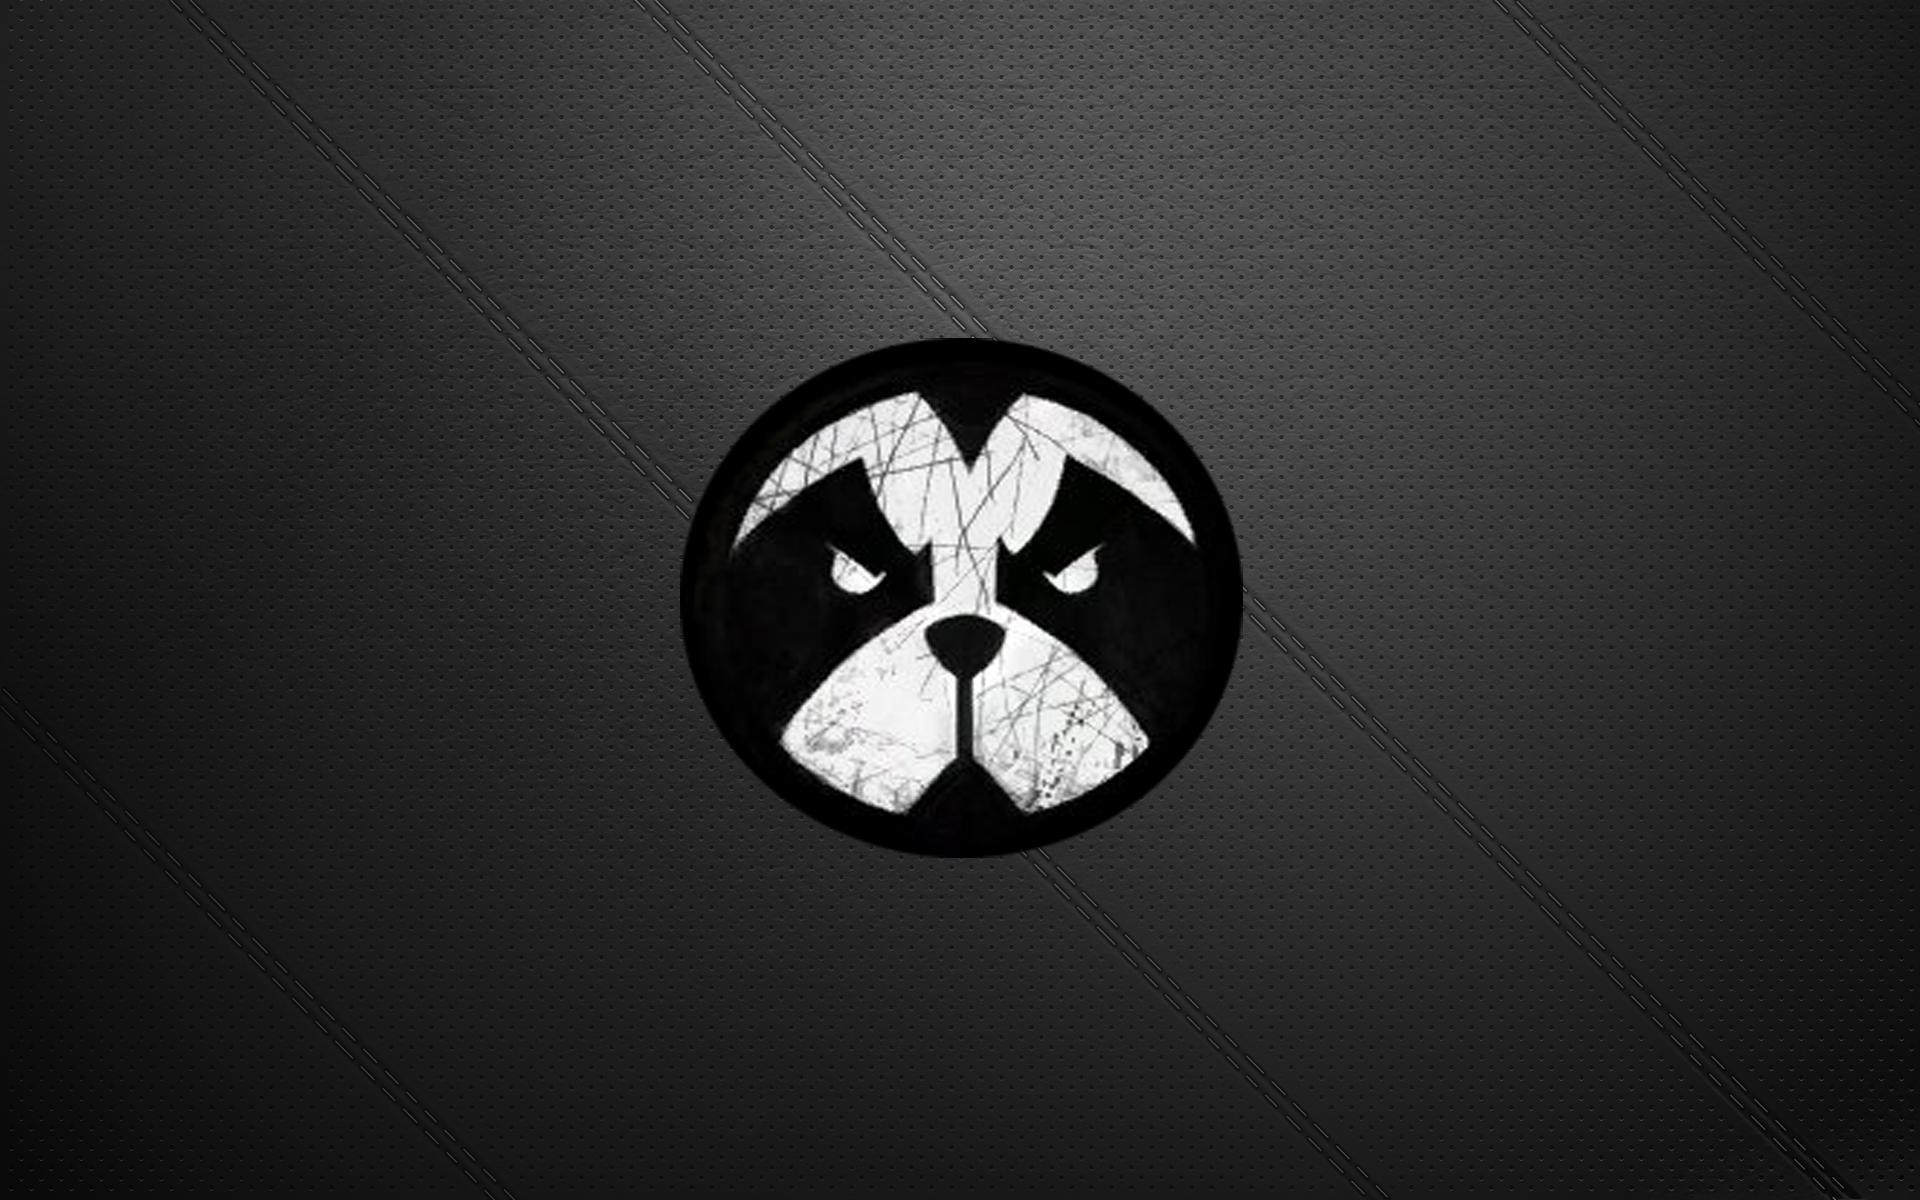 Panda Cool Logo - Wallpaper Request] The Starcraft 2 Panda Decal on a Black Background ...